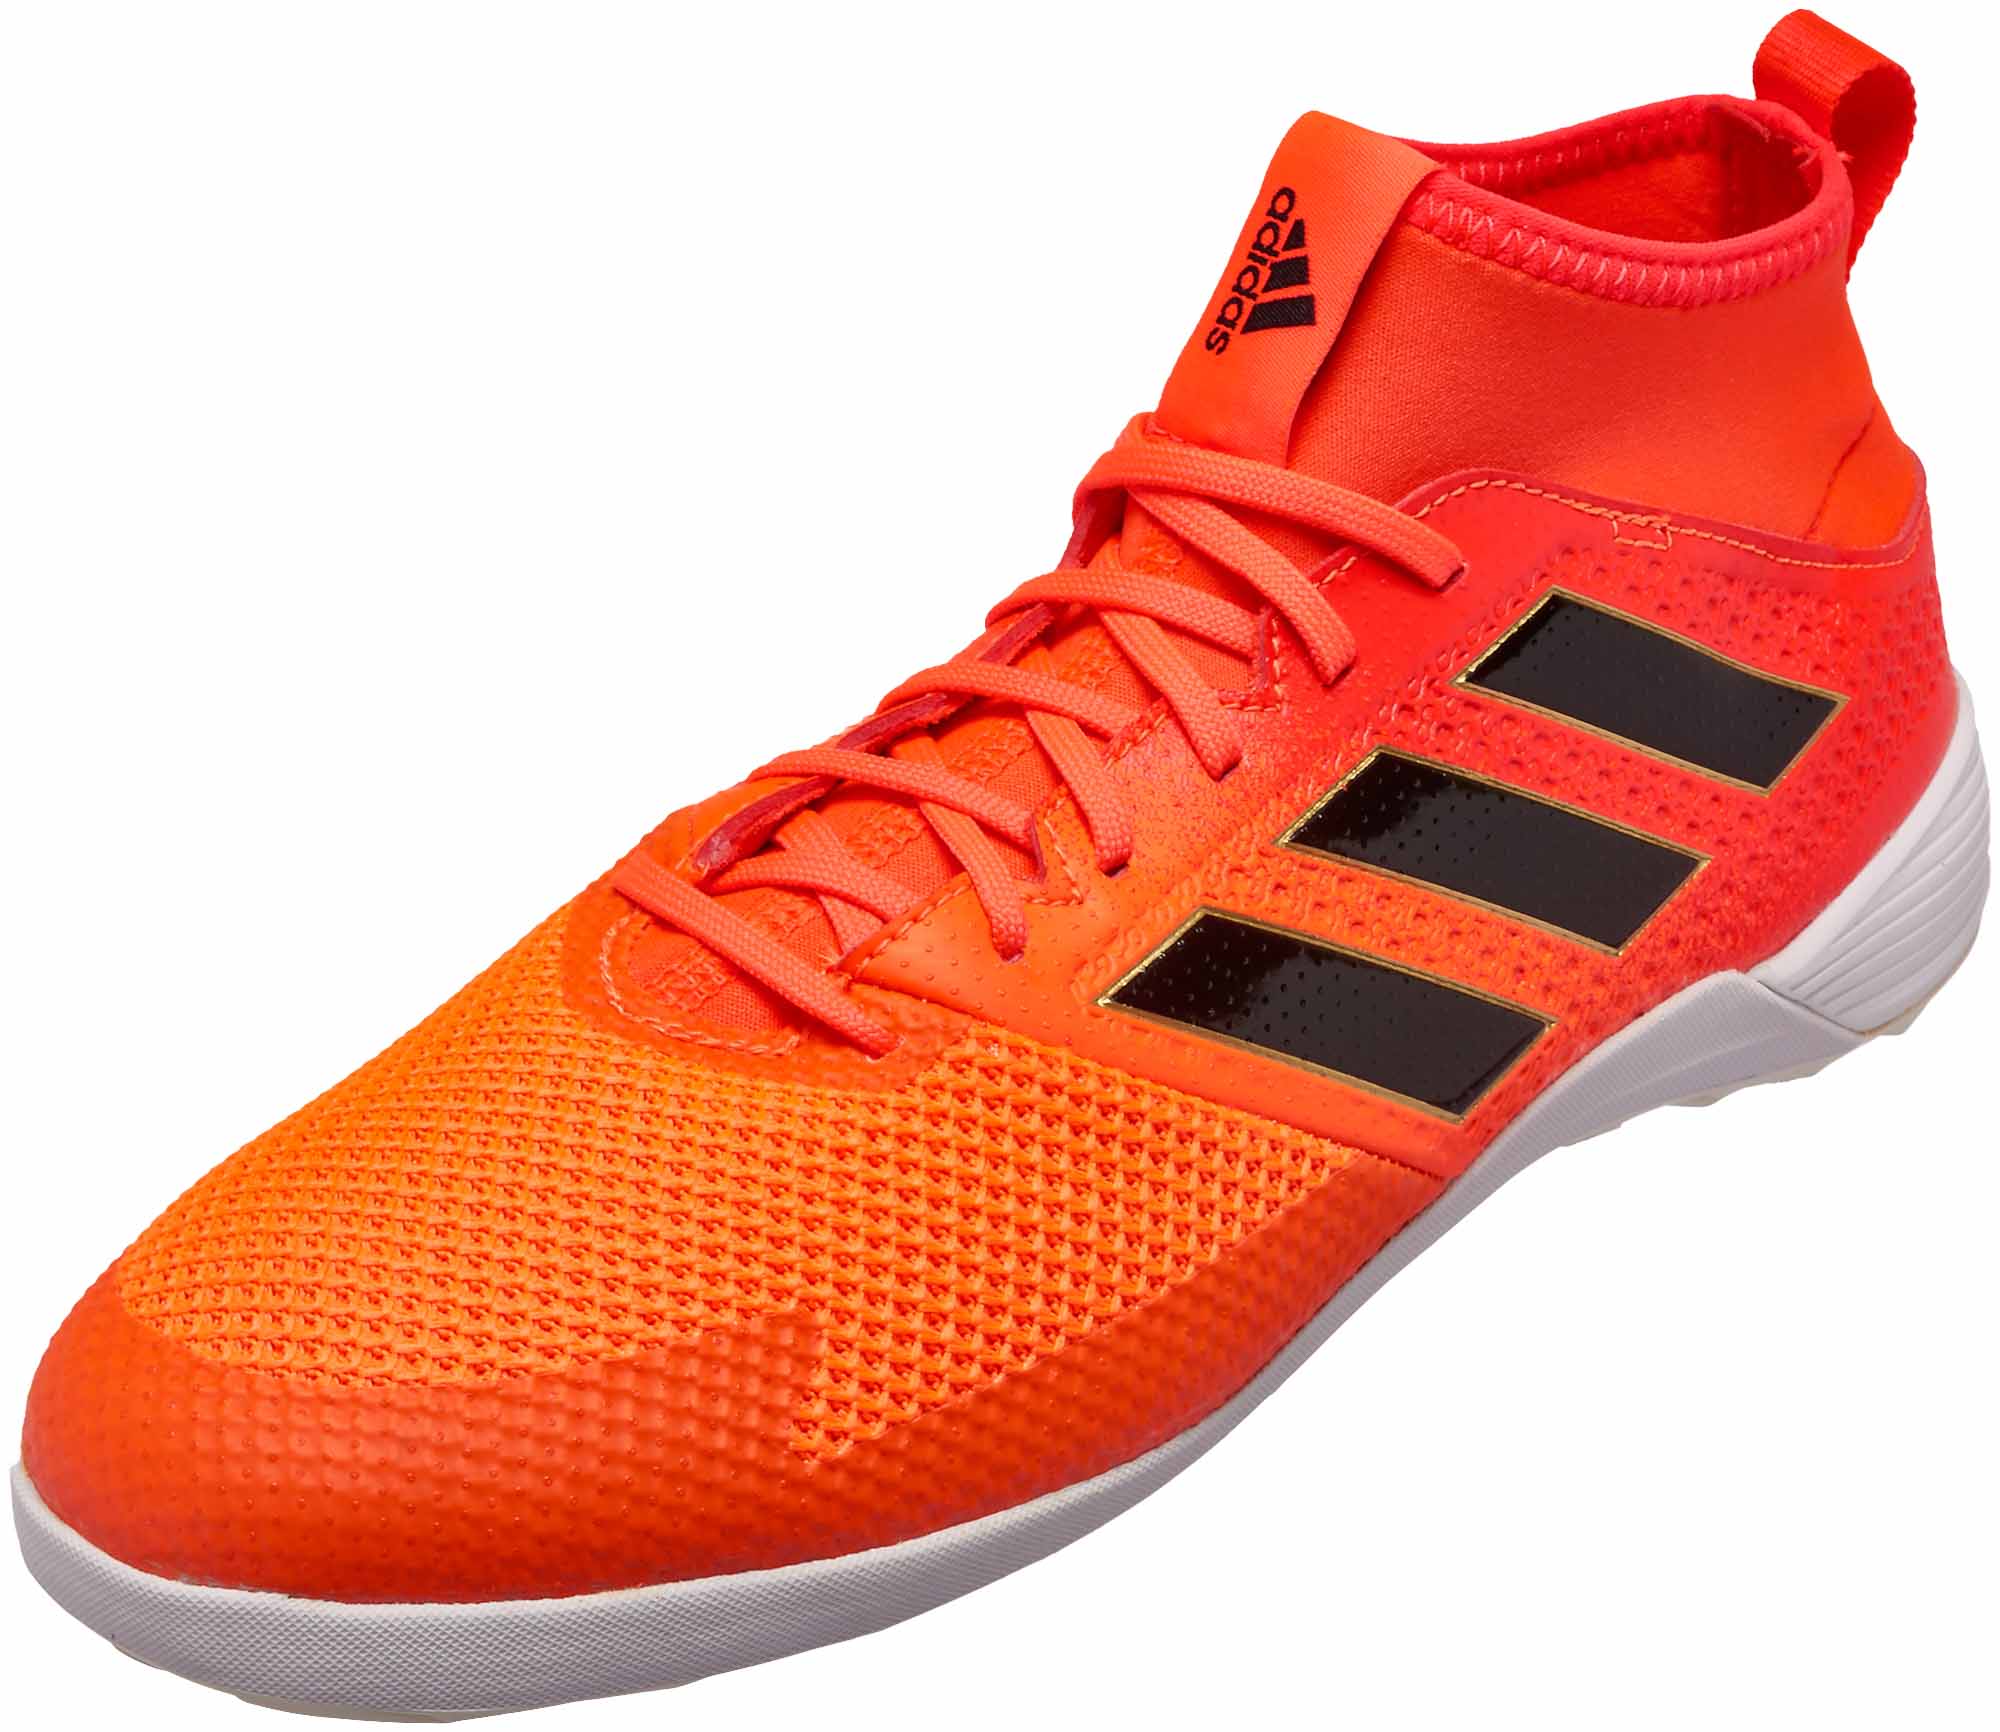 adidas ACE Tango 17.3 IN - Solar Red 